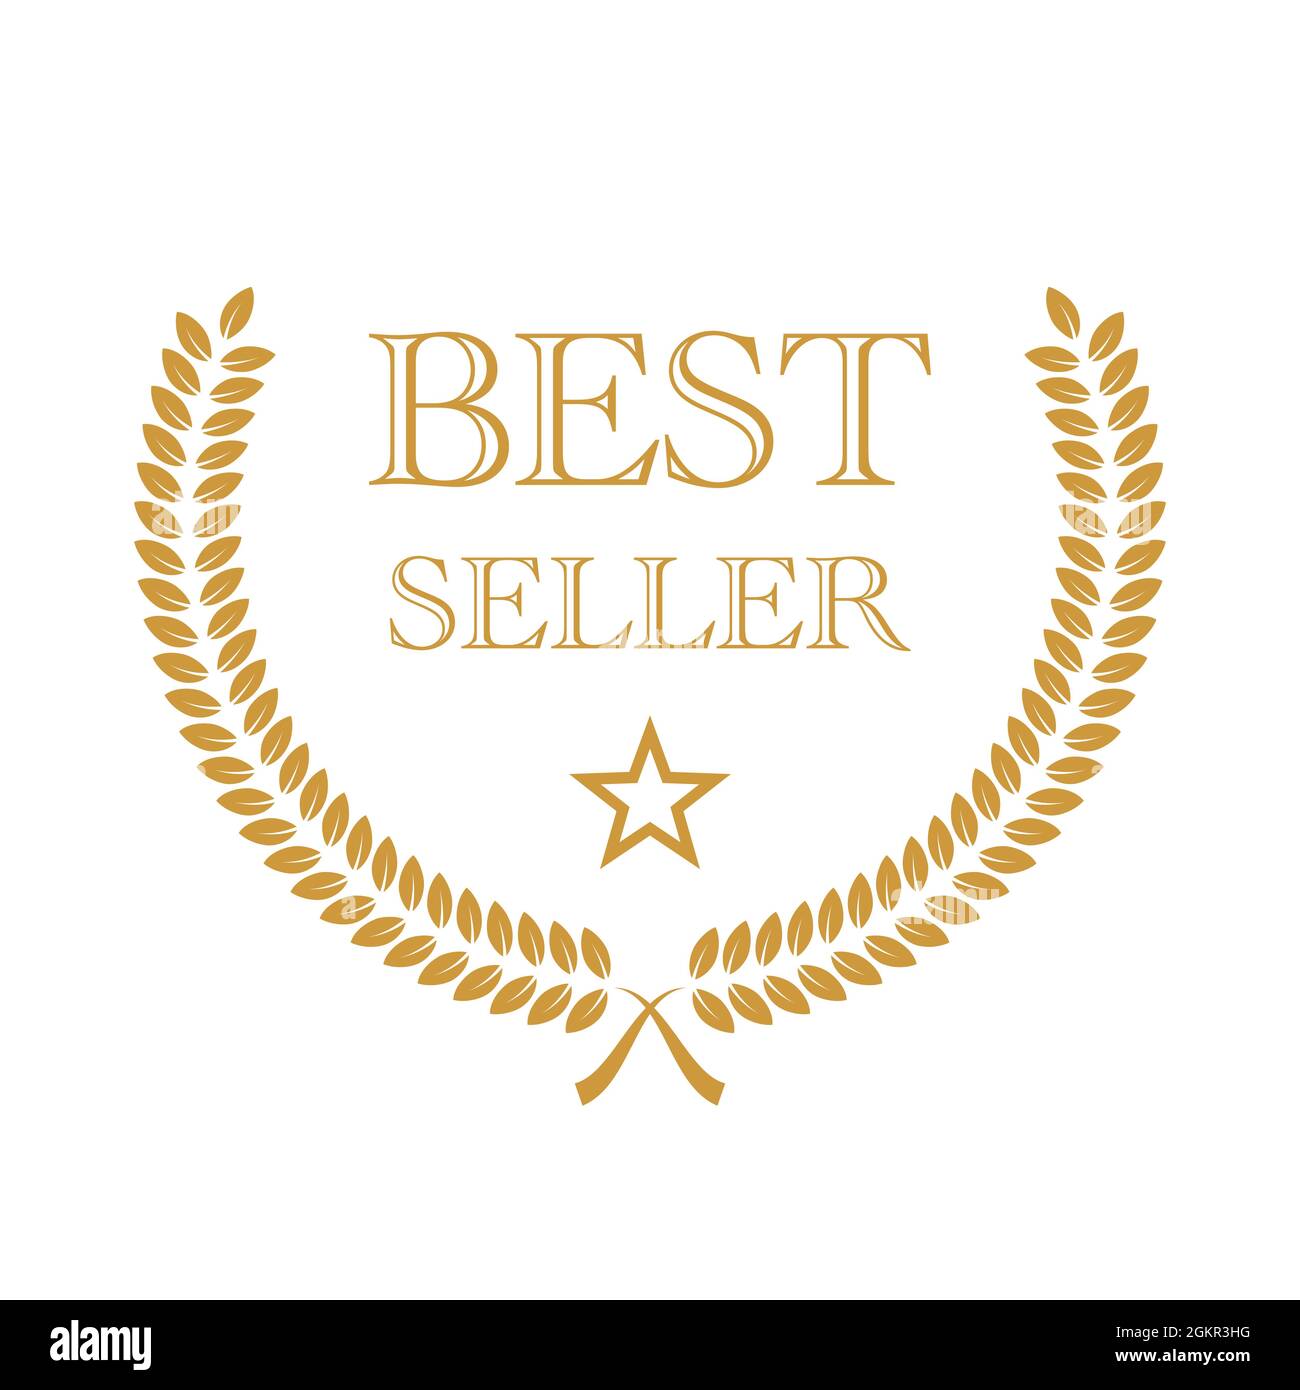 Best Sellers Icon On A White Background. 3D Illustration. Stock